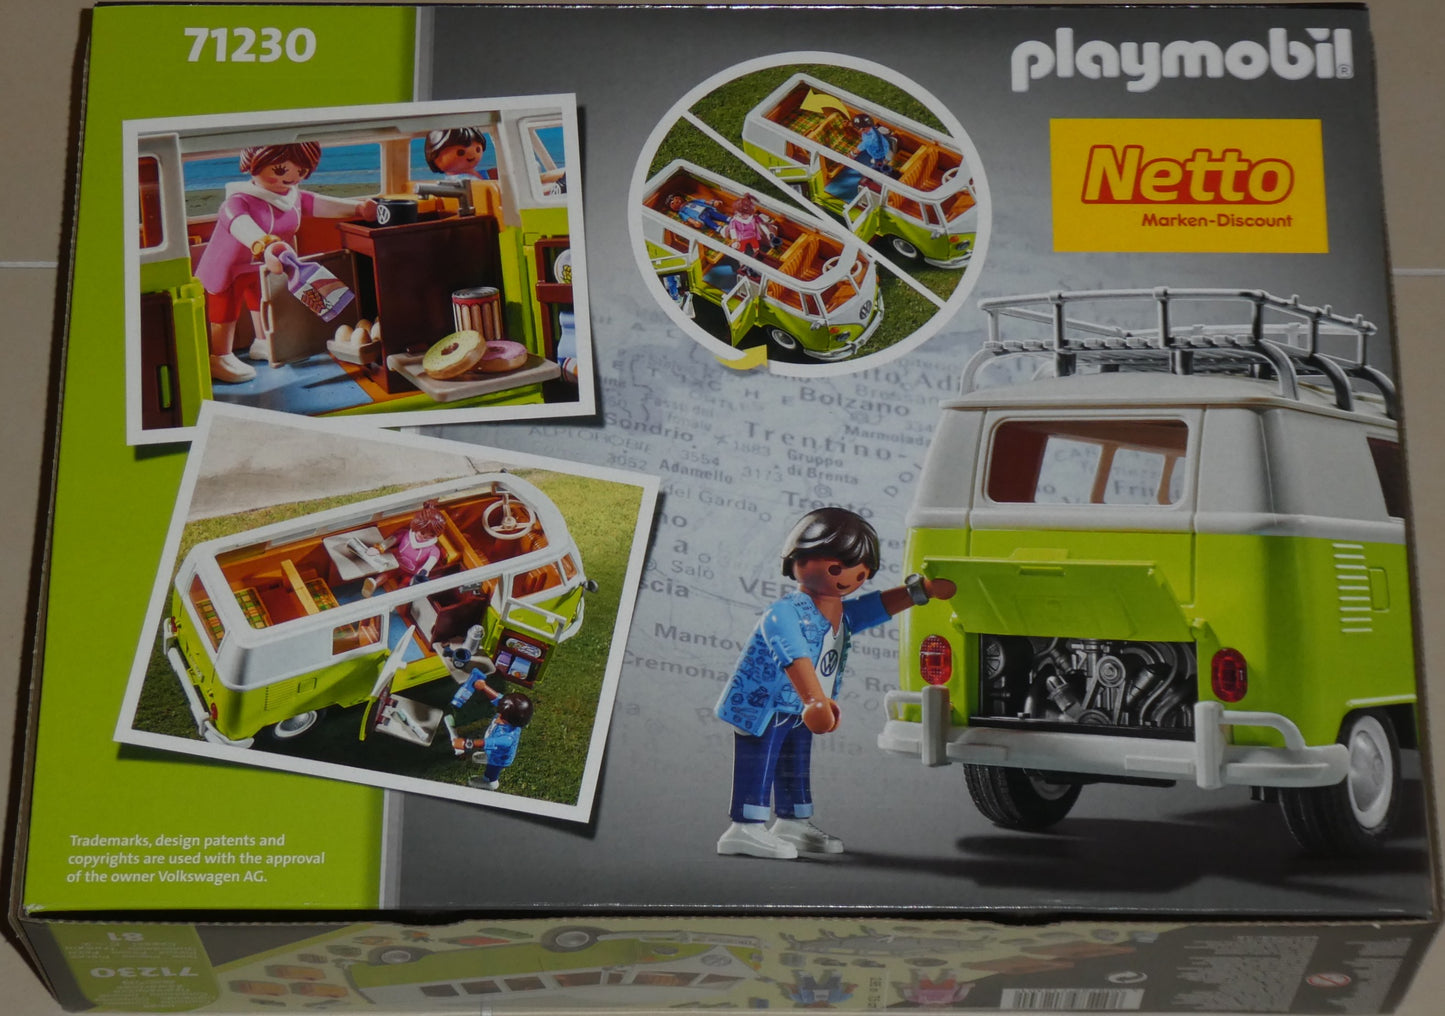 Playmobil 71230 Volkswagen T1 Camping Bus - Netto Edition